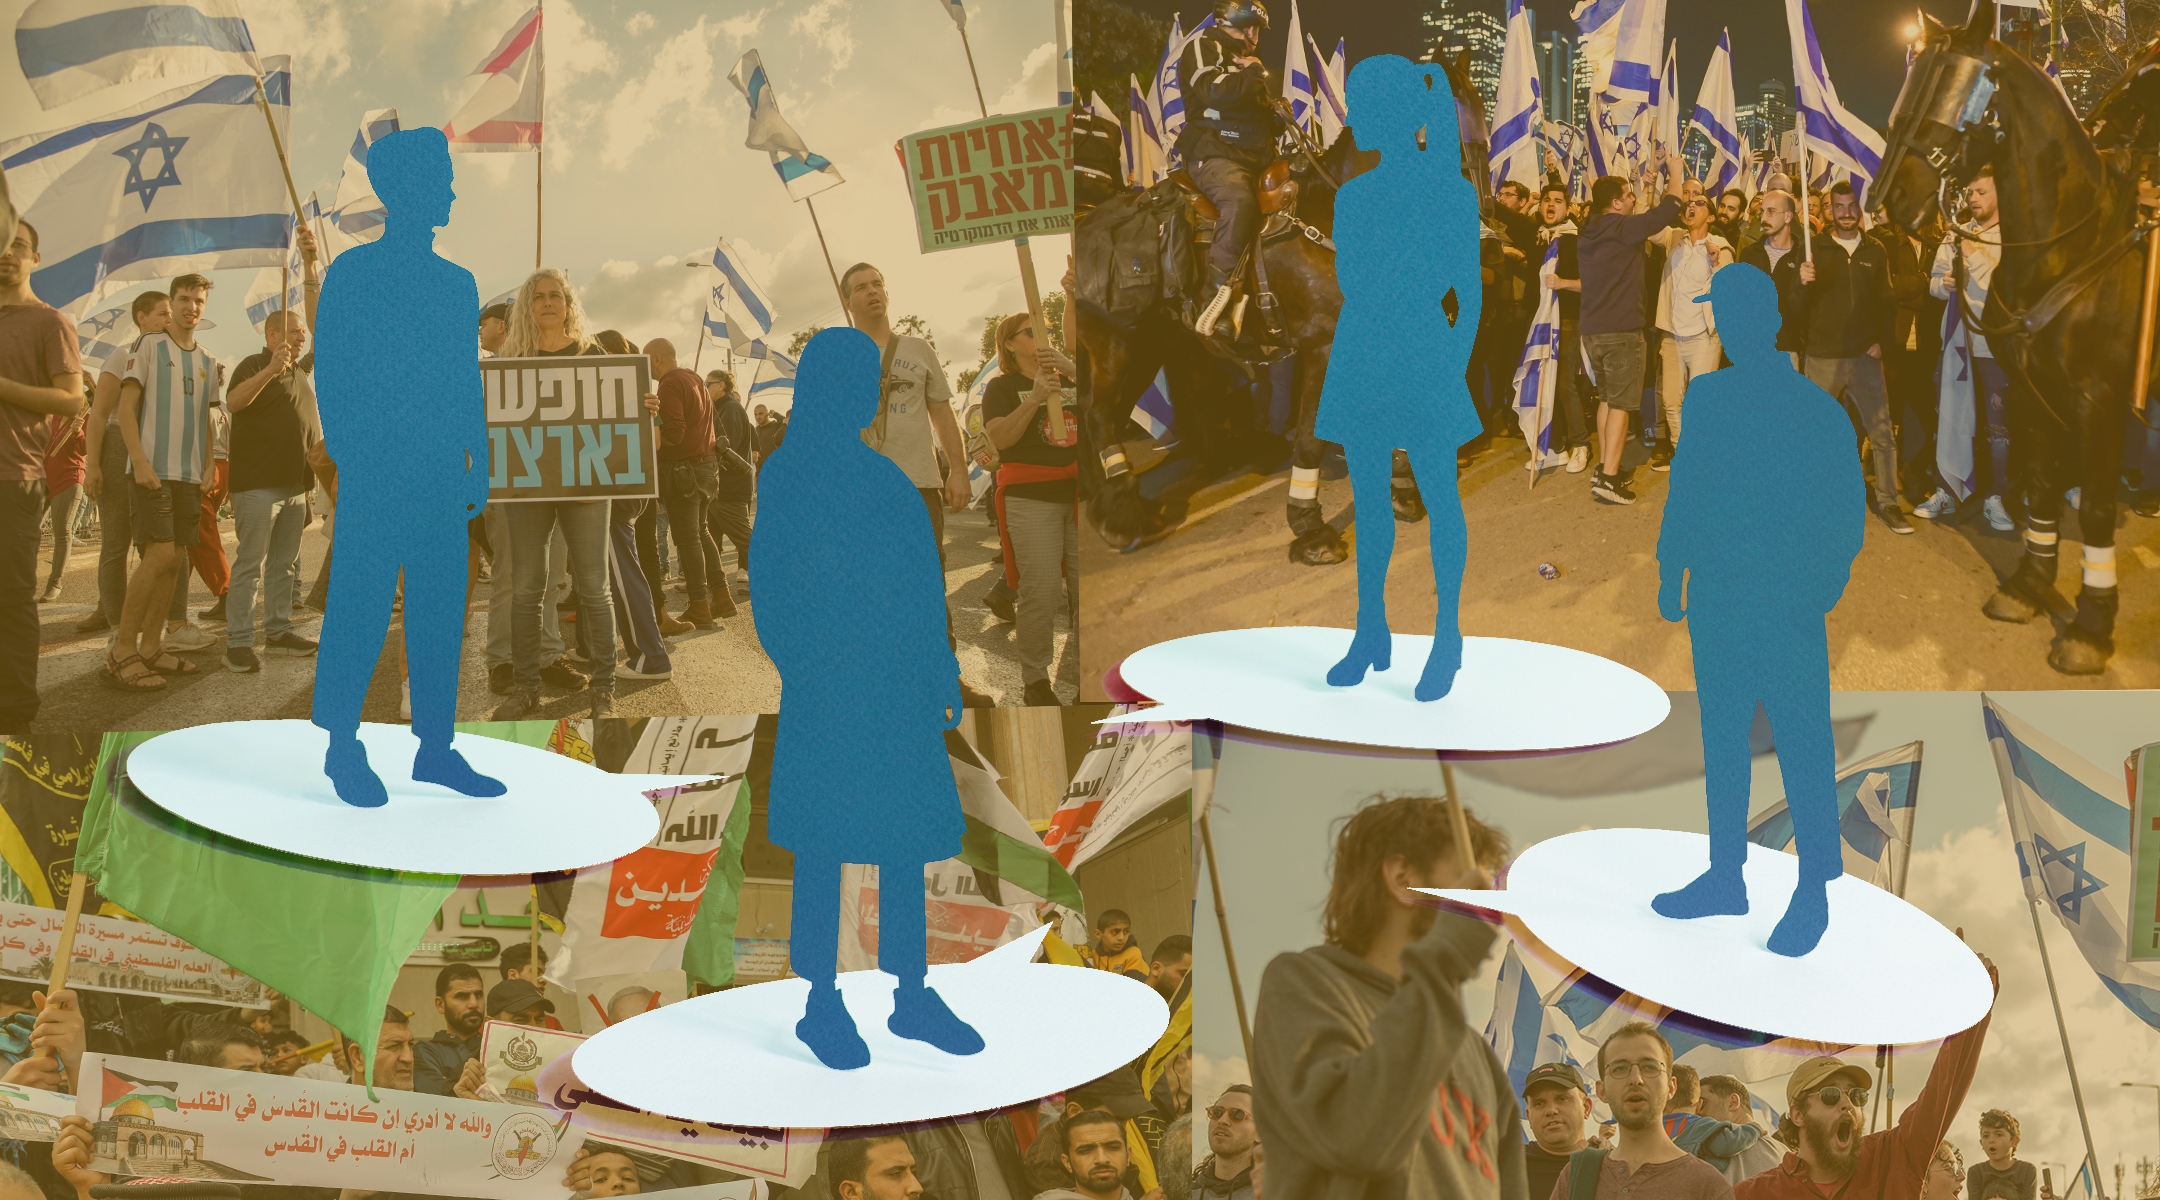 How hard is it to talk about Israel? We asked 4 Jewish teens